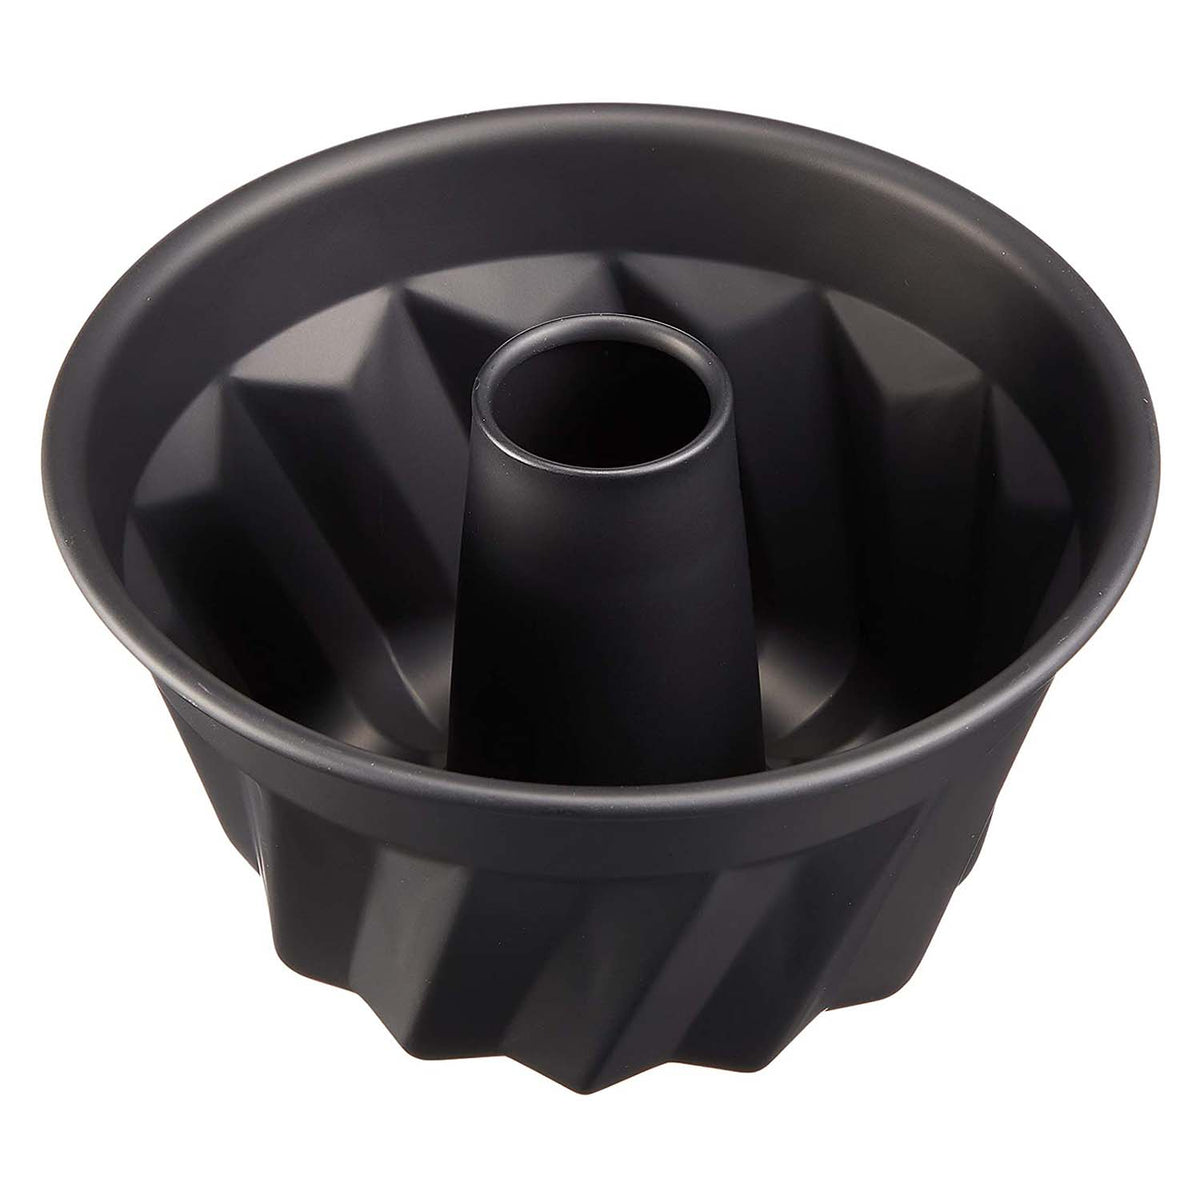 China Brand new bundt cake pan with high quality Factory and Manufacturers